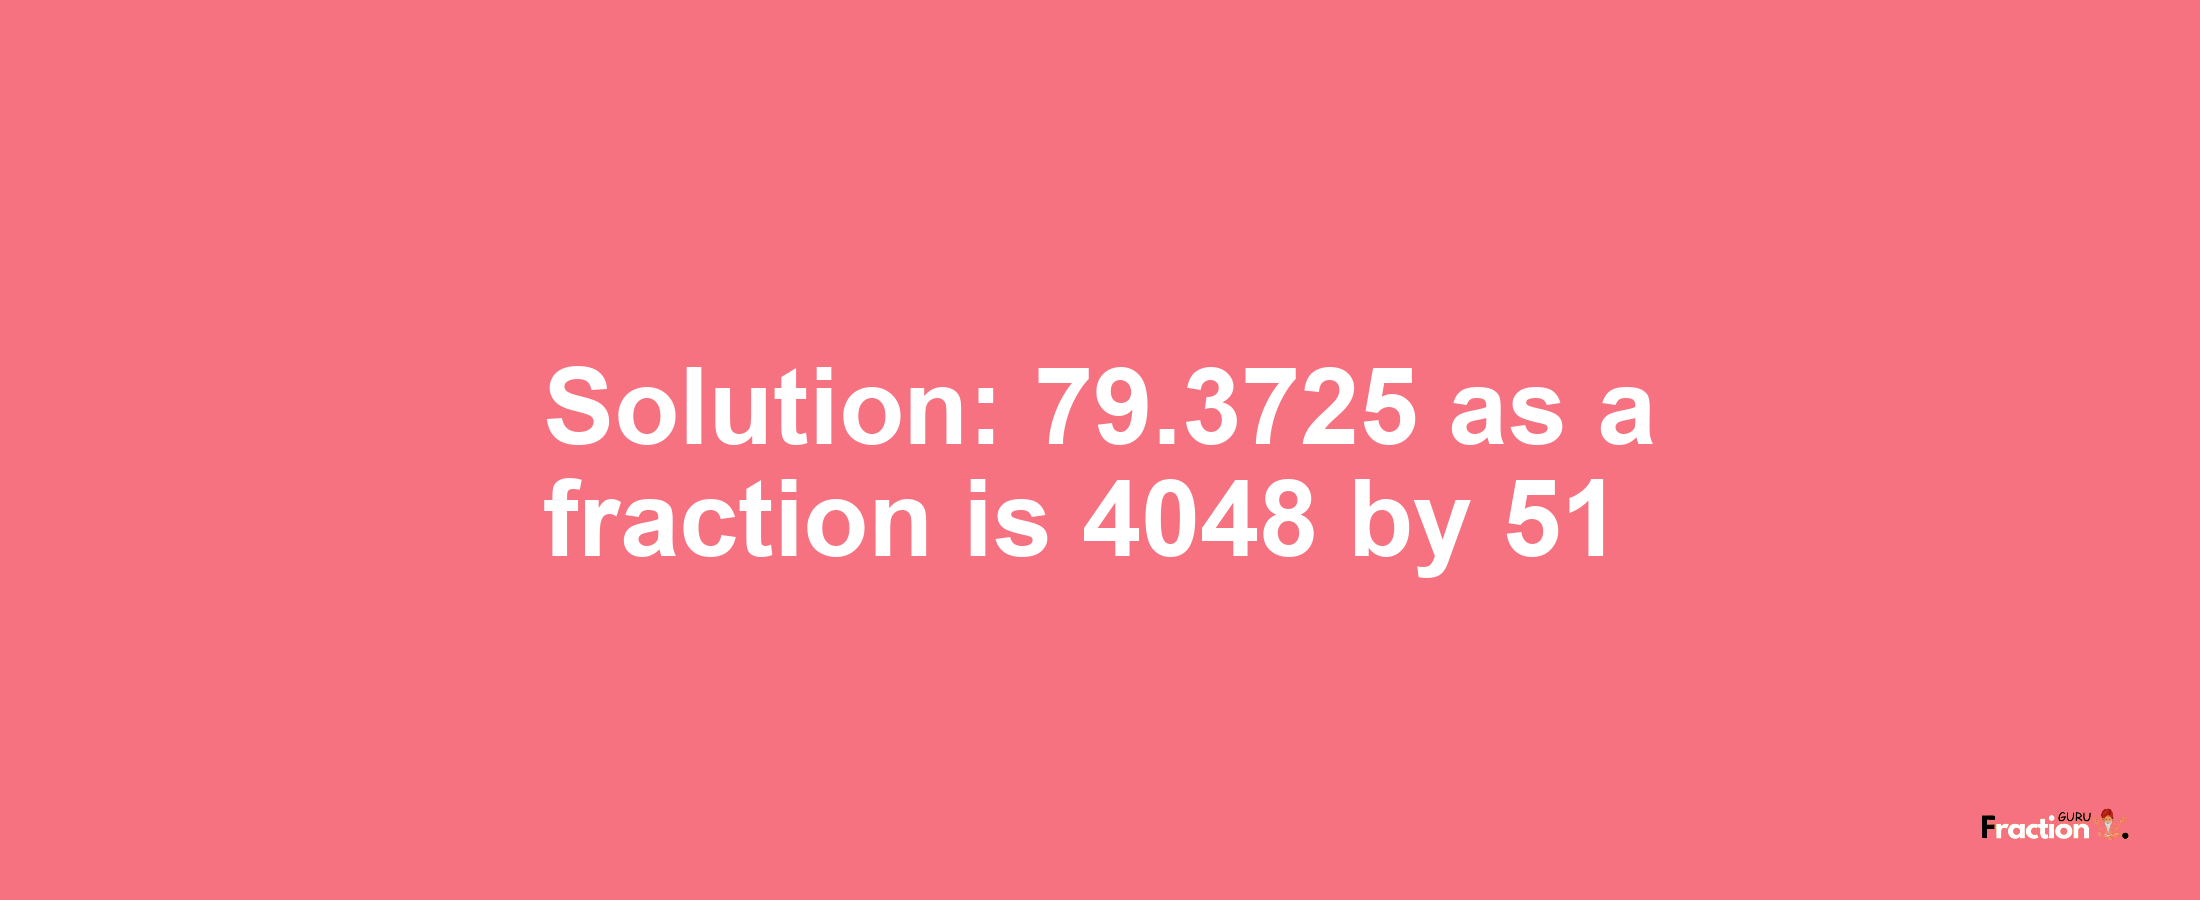 Solution:79.3725 as a fraction is 4048/51